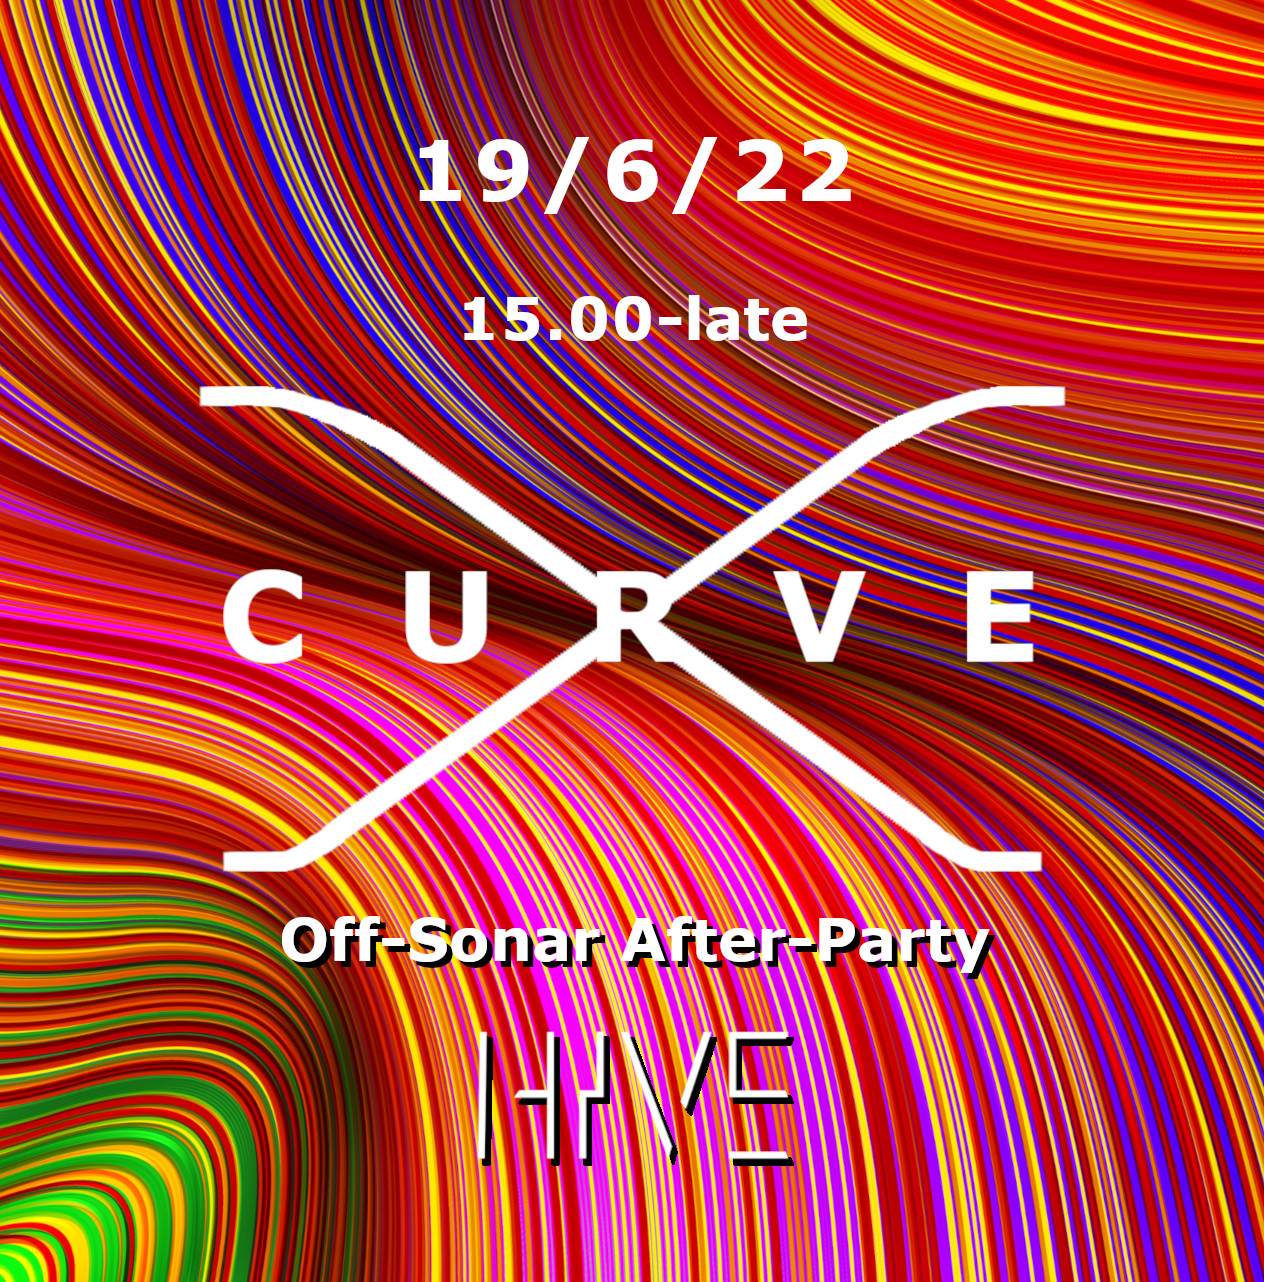 Curve - Off Sonar free afterparty - フライヤー表